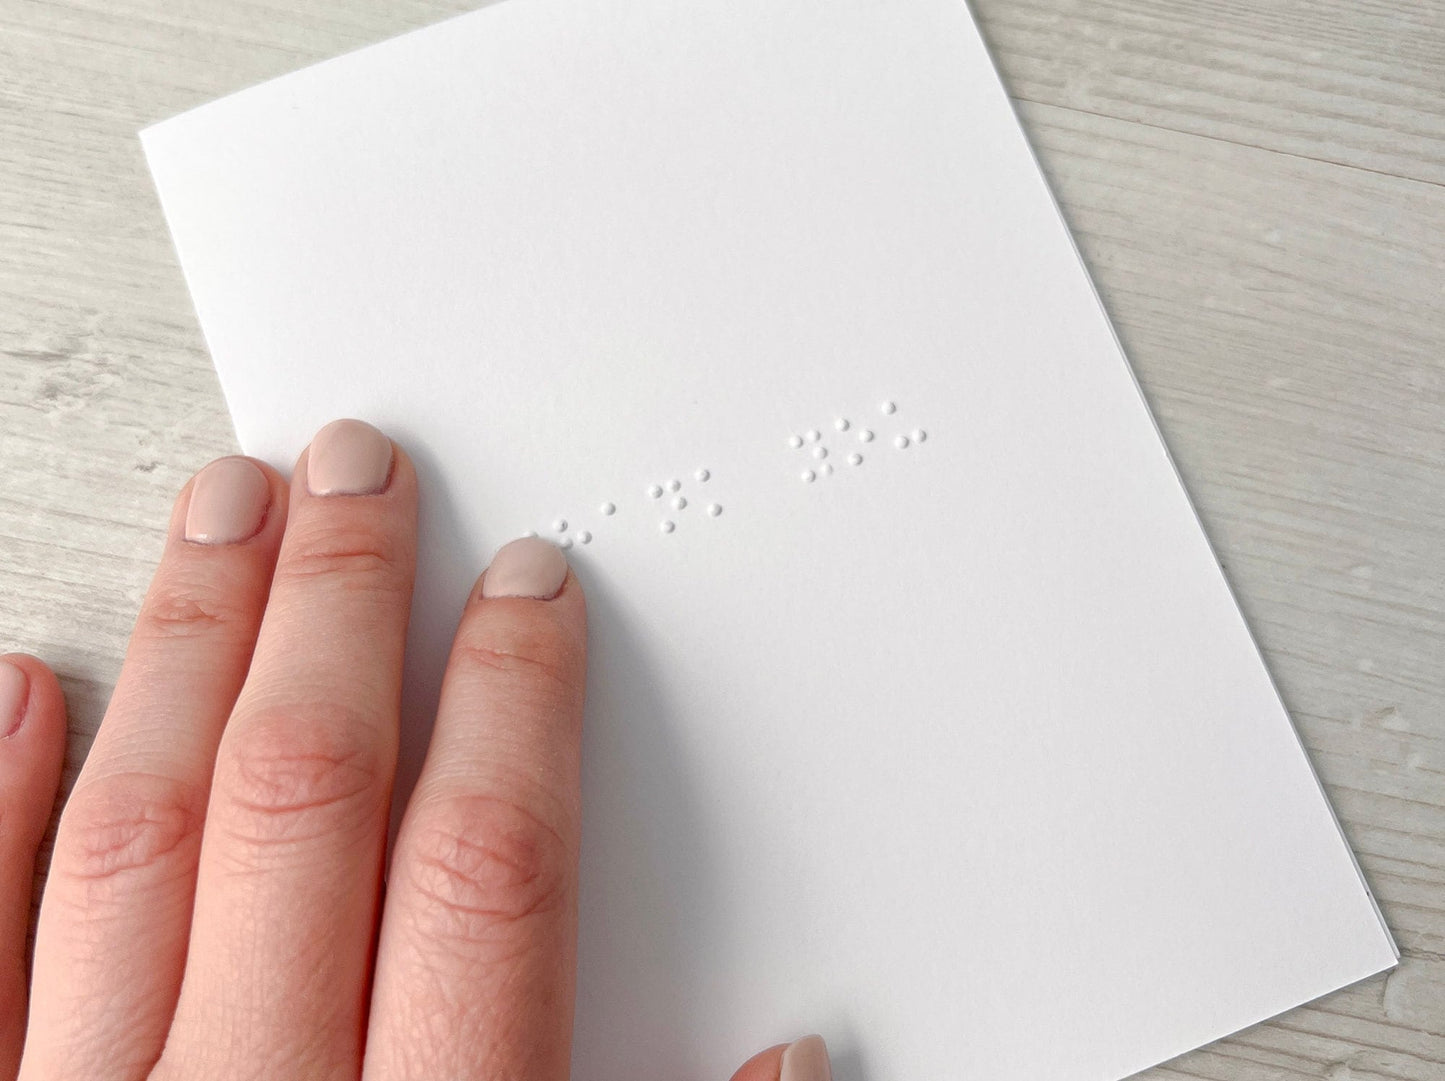 Braille 13th Birthday Greetings Card - Tactile Card for Blind and Visually Impaired People